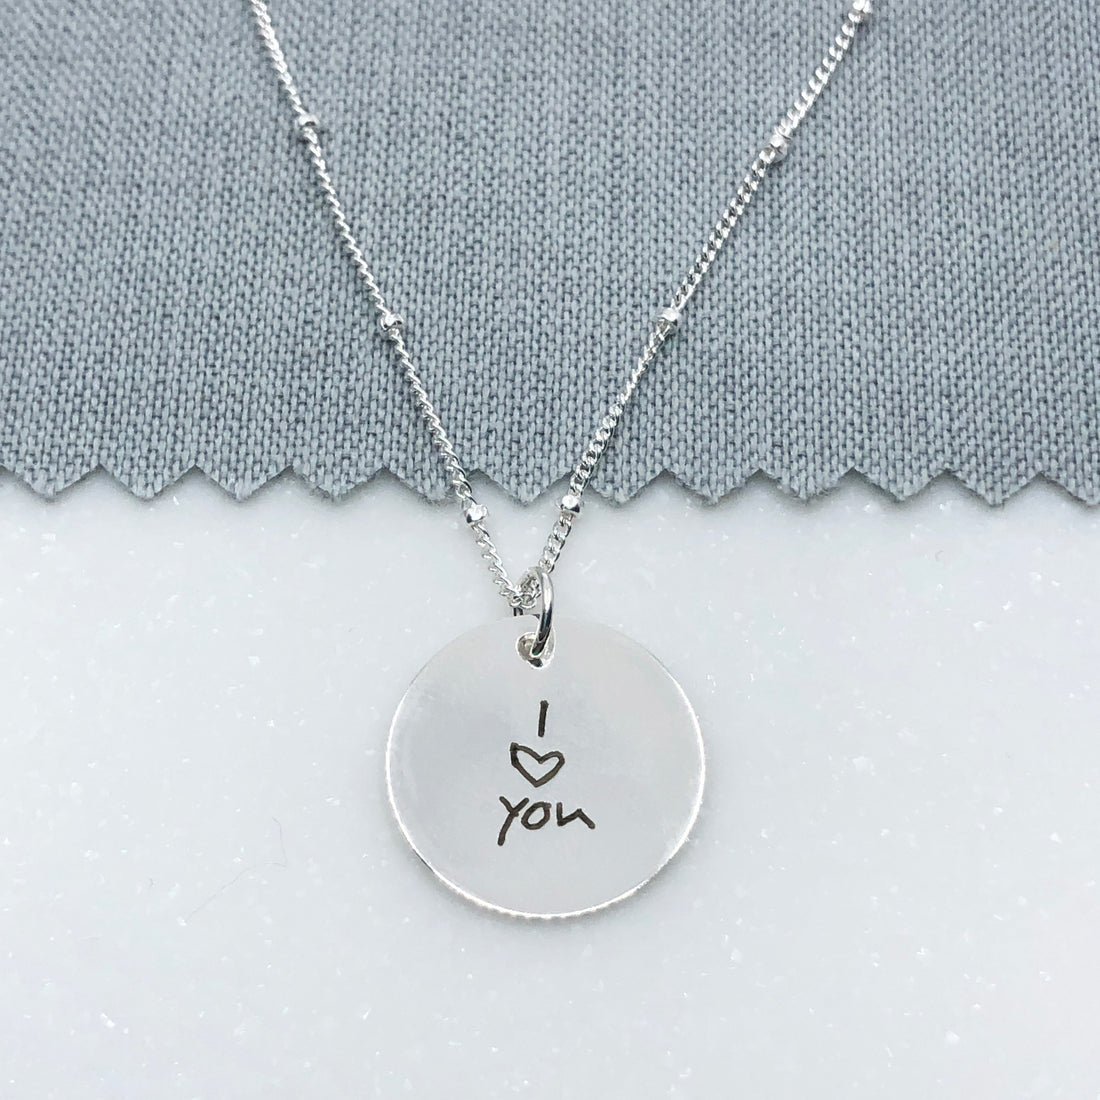 Personalised sterling silver necklace with your handwriting or artwork